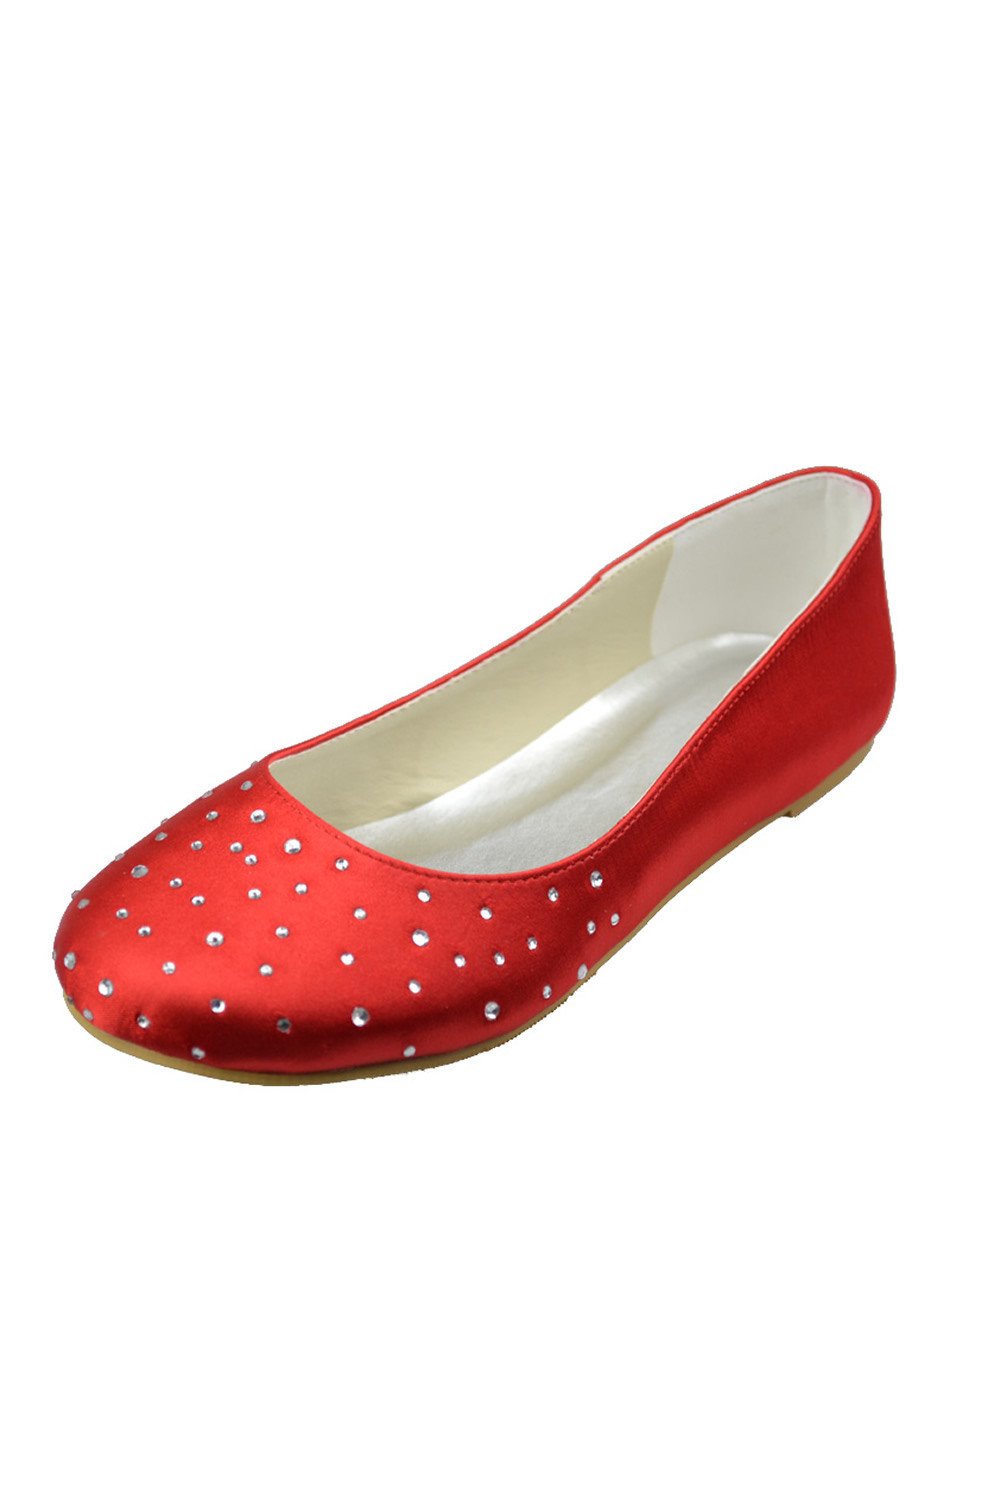 Hand Made Close Toe Flats Wedding Party Shoes L-030